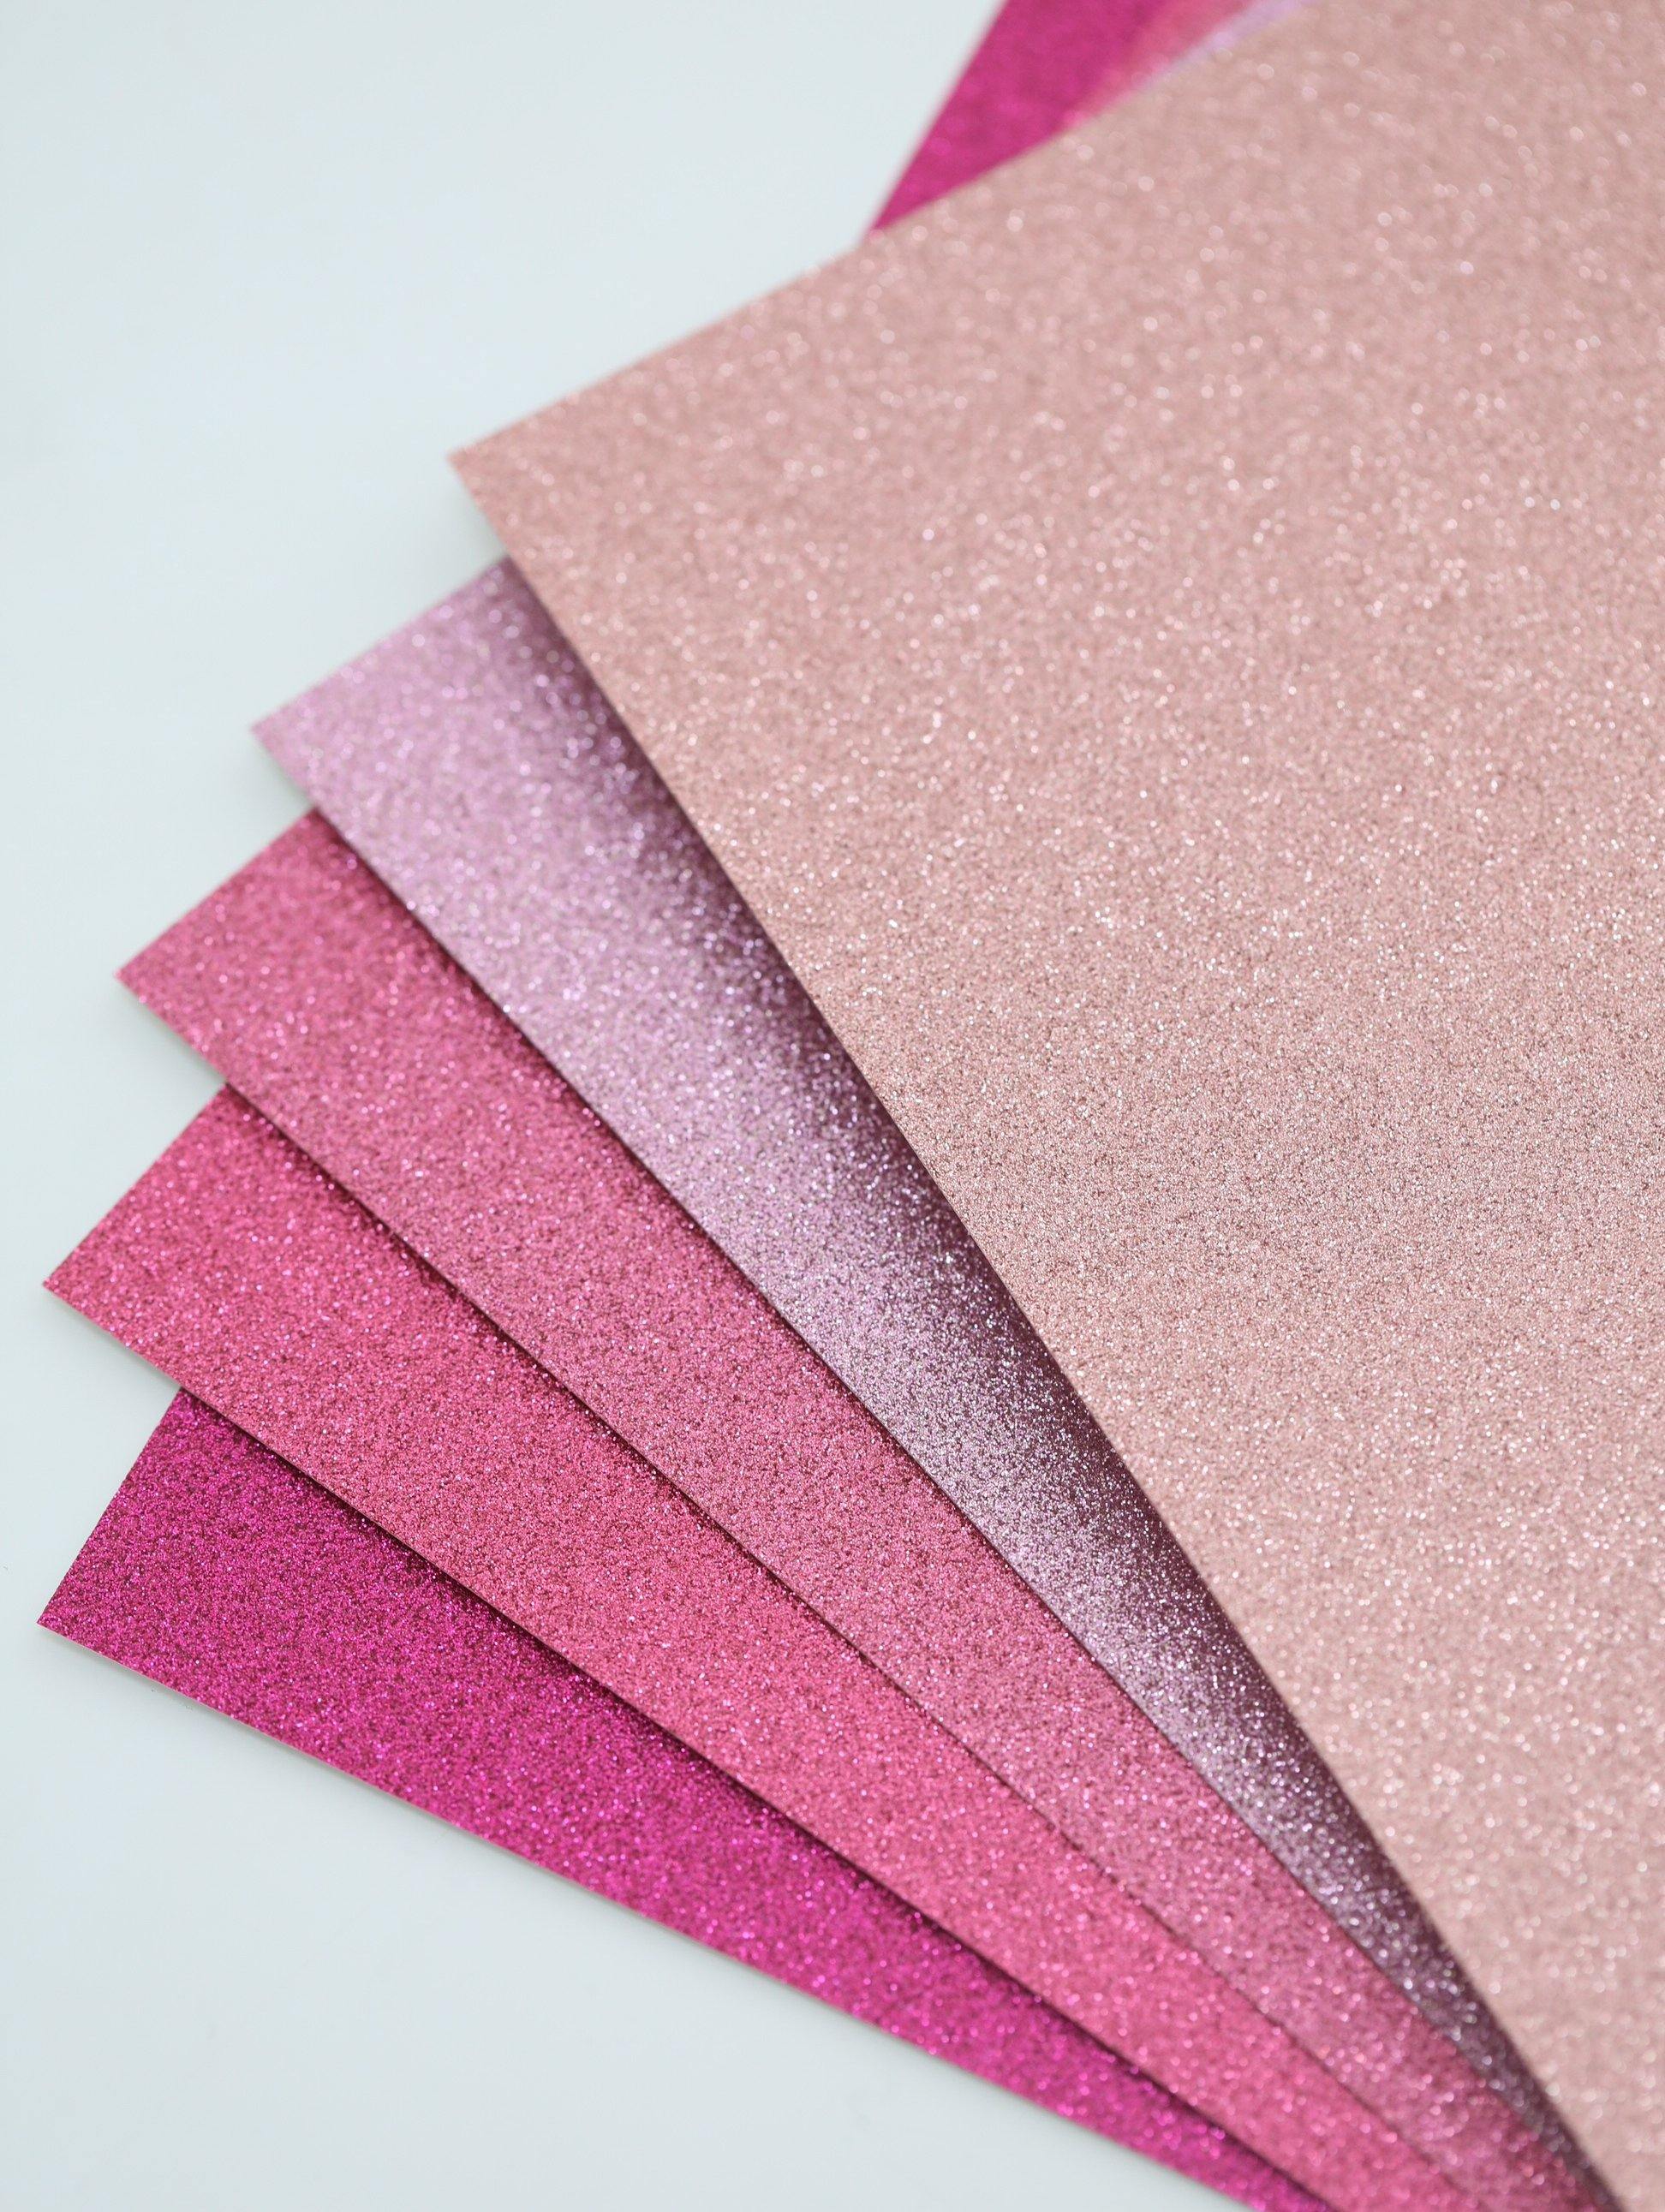 Glitter Cardstock Rose Collection--GooglyGooeys | Cricut | Arts Craft and DIY Store based in the Philippines